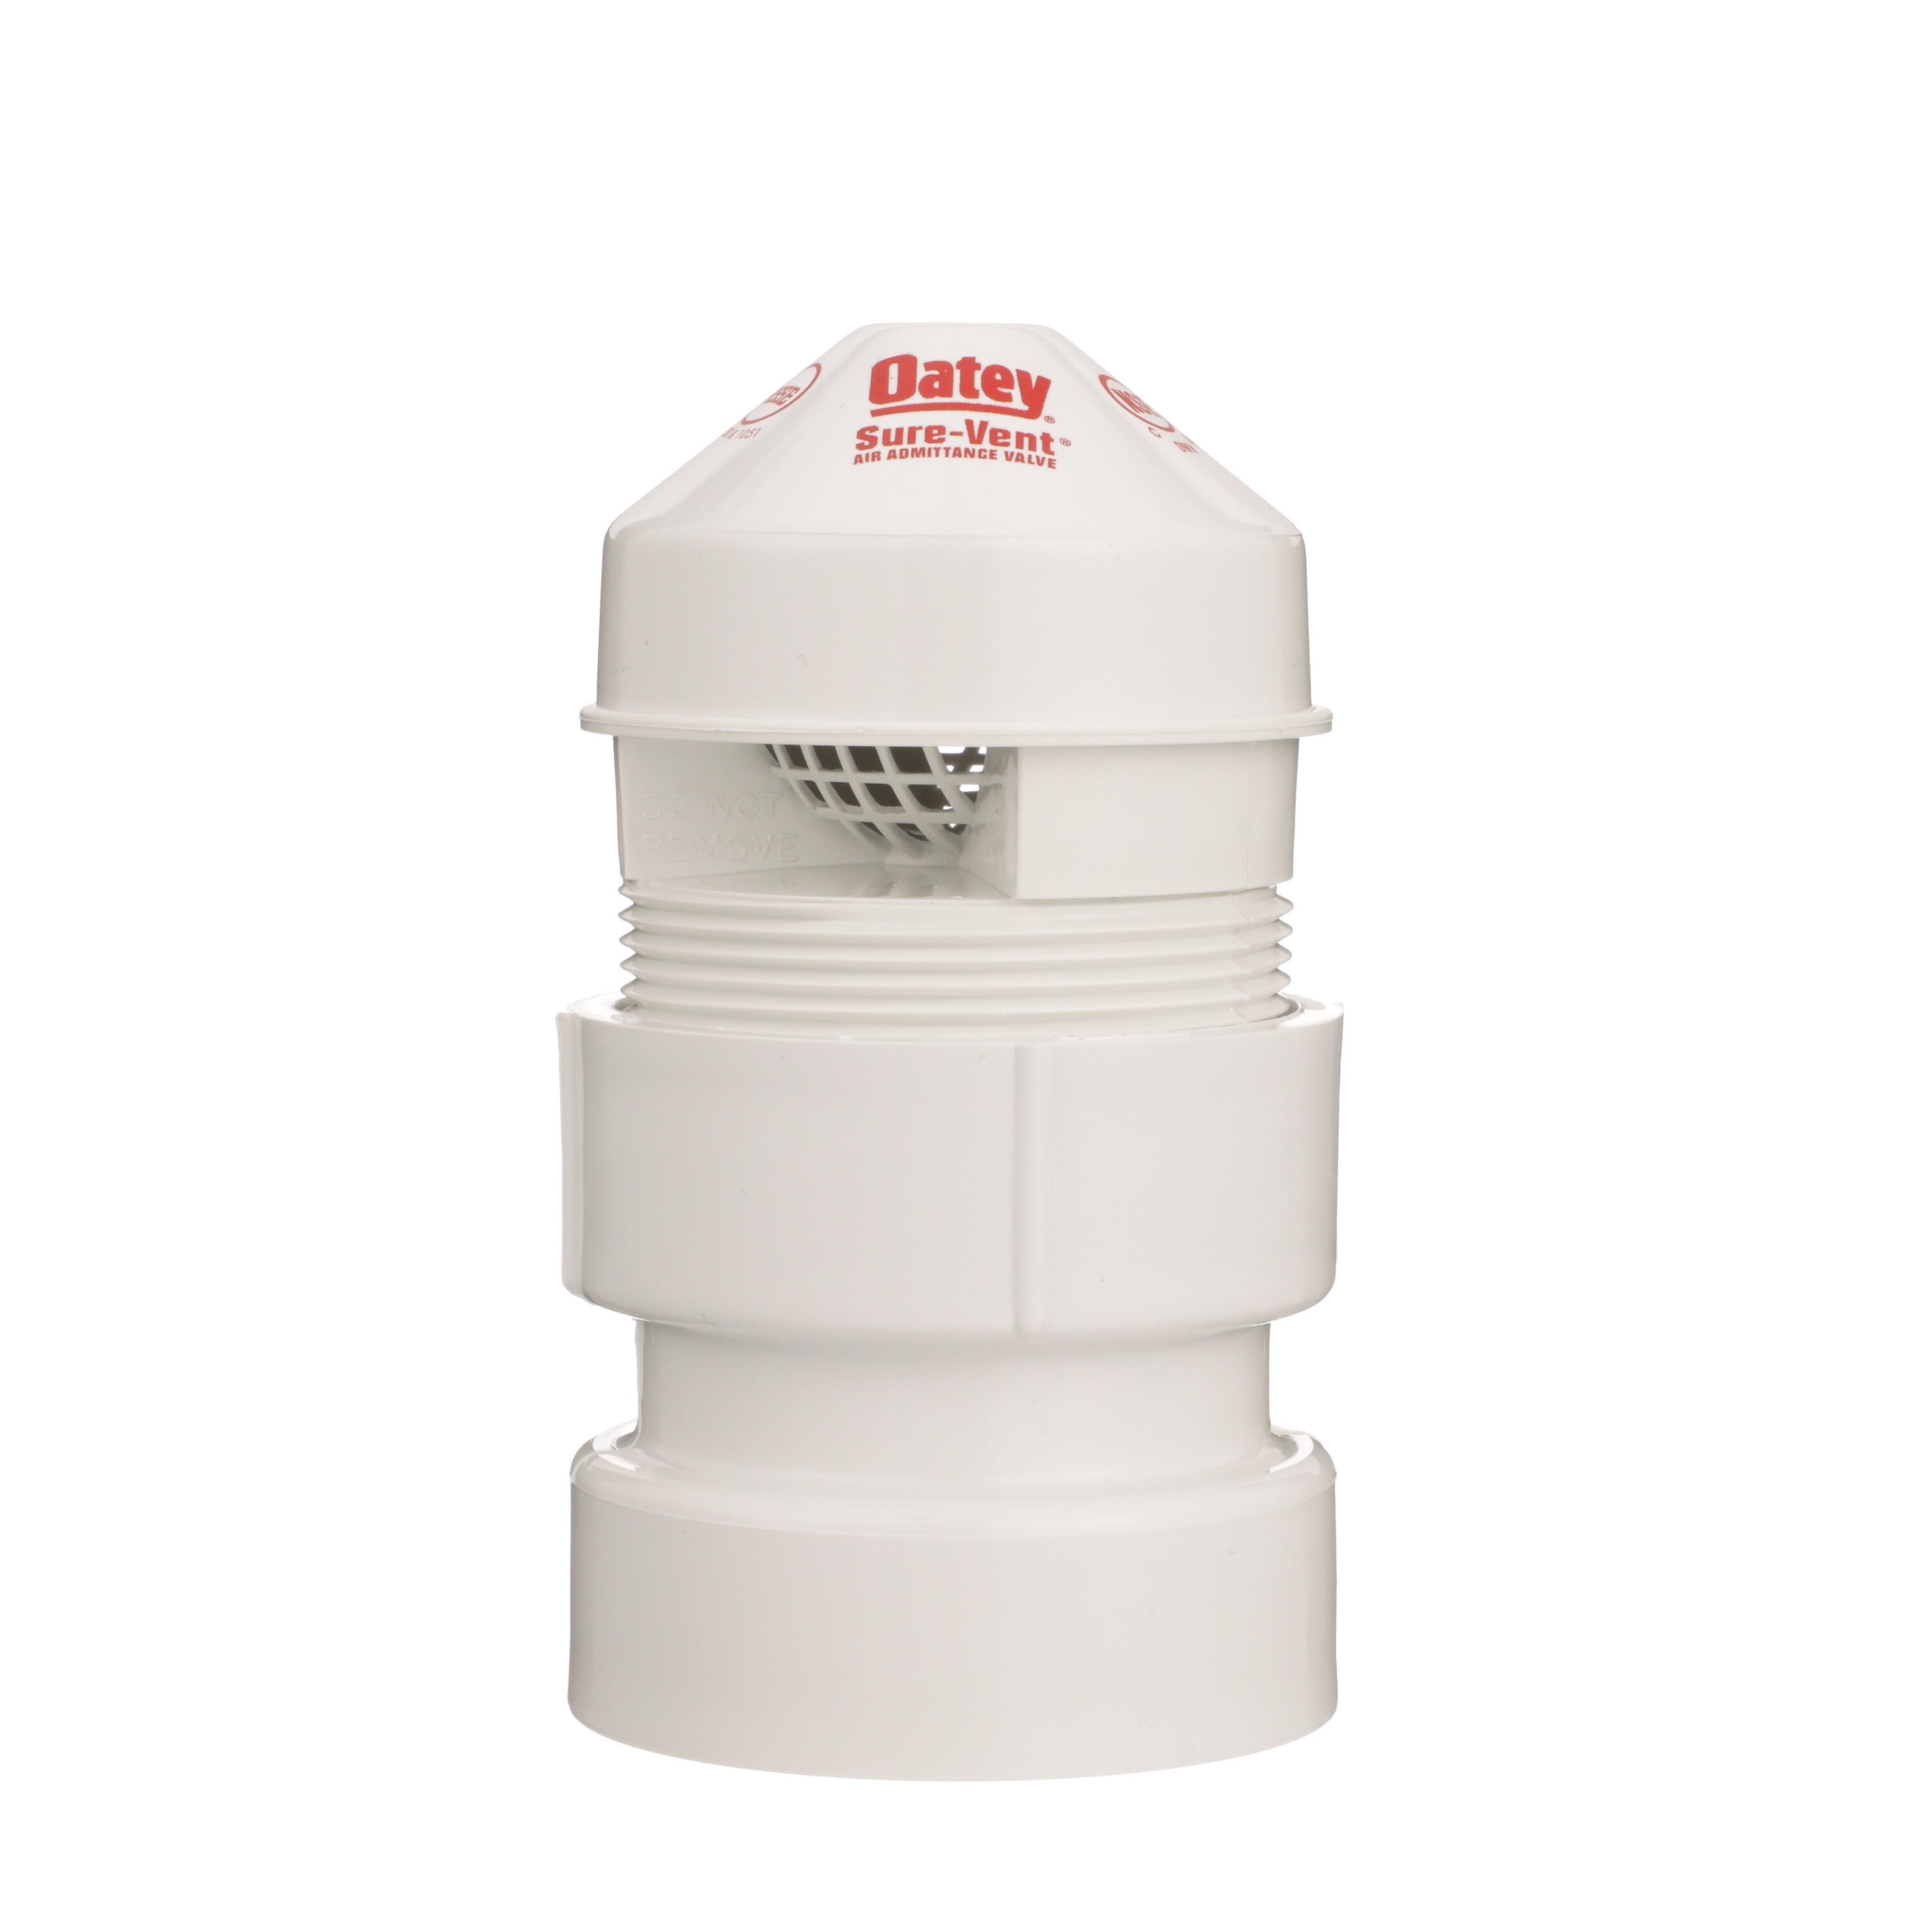 Oatey® Sure-Vent® 39017 Air Admittance Valve With 1-1/2 x 2 in PVC SCH 40 Adapter, 1-1/2 to 2 in Nominal, NPT End Style, 20 DFU Flow Rate, PVC Body